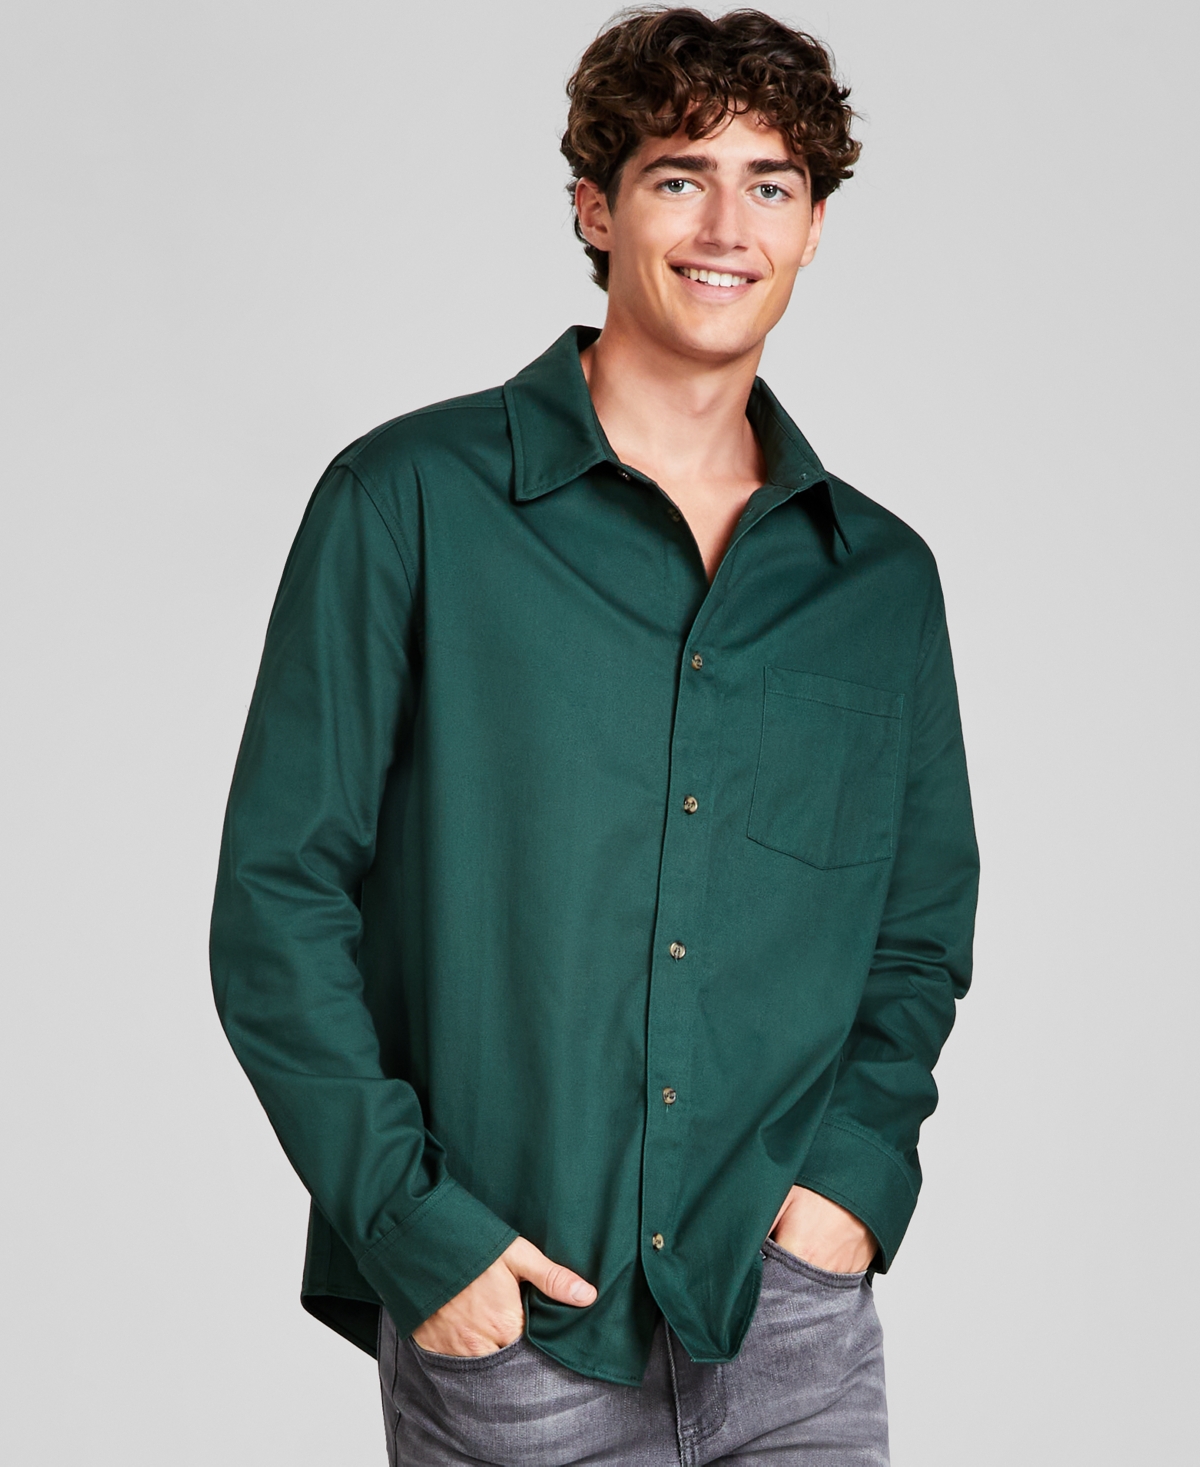 AND NOW THIS MEN'S OXFORD TWILL LONG-SLEEVE BUTTON-UP SHIRT